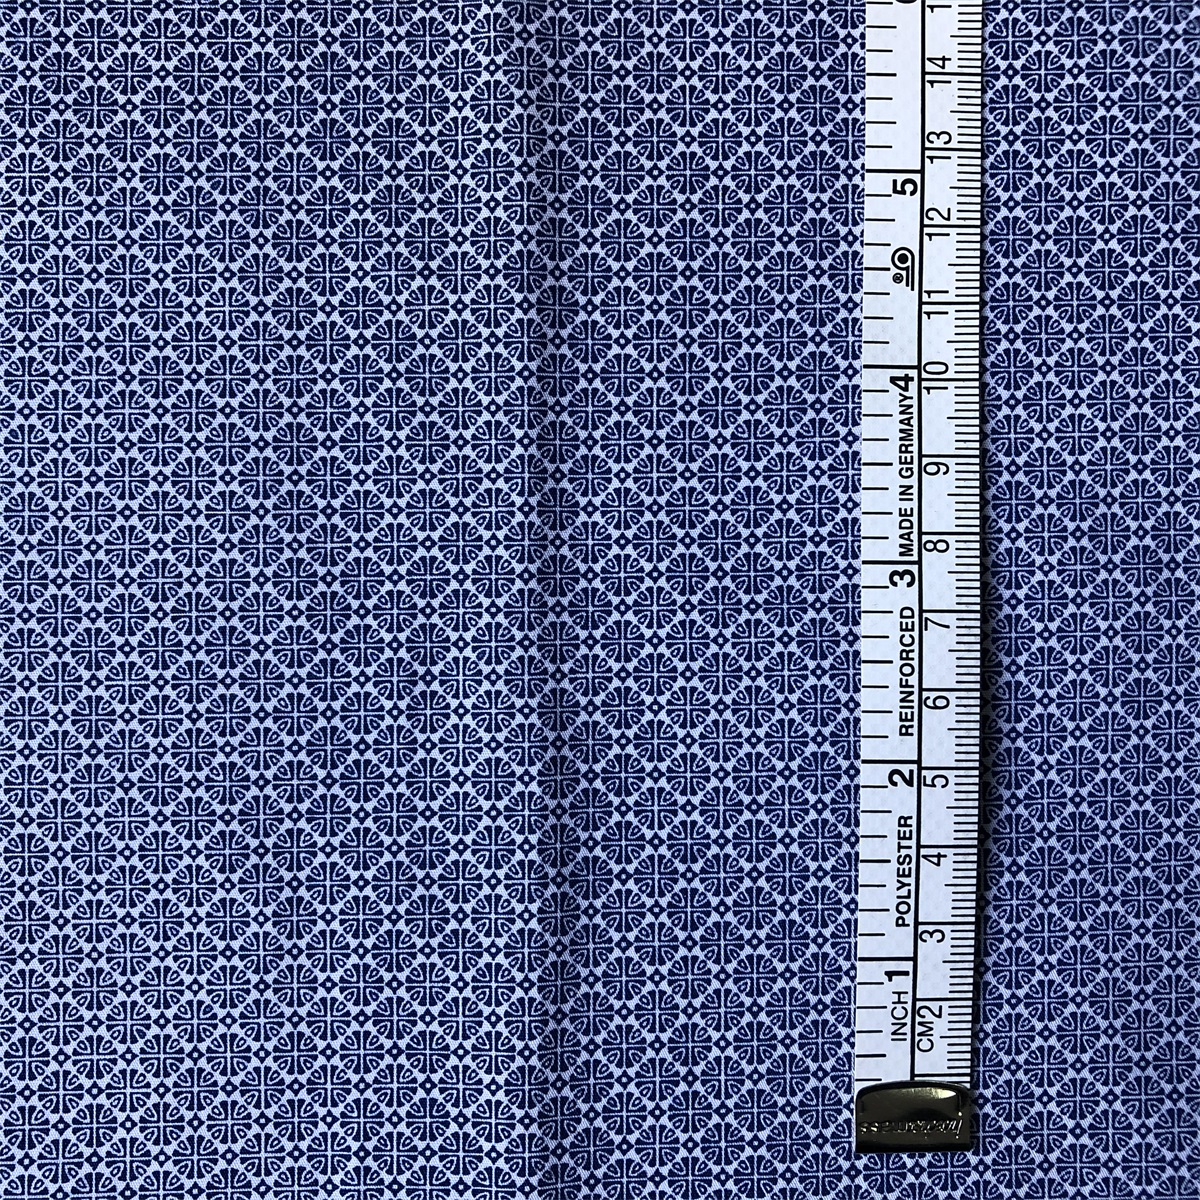 Sun-rising Textile Cotton fabric high quality Eco-friendly 100% cotton poplin printed woven fabric for men's shirts